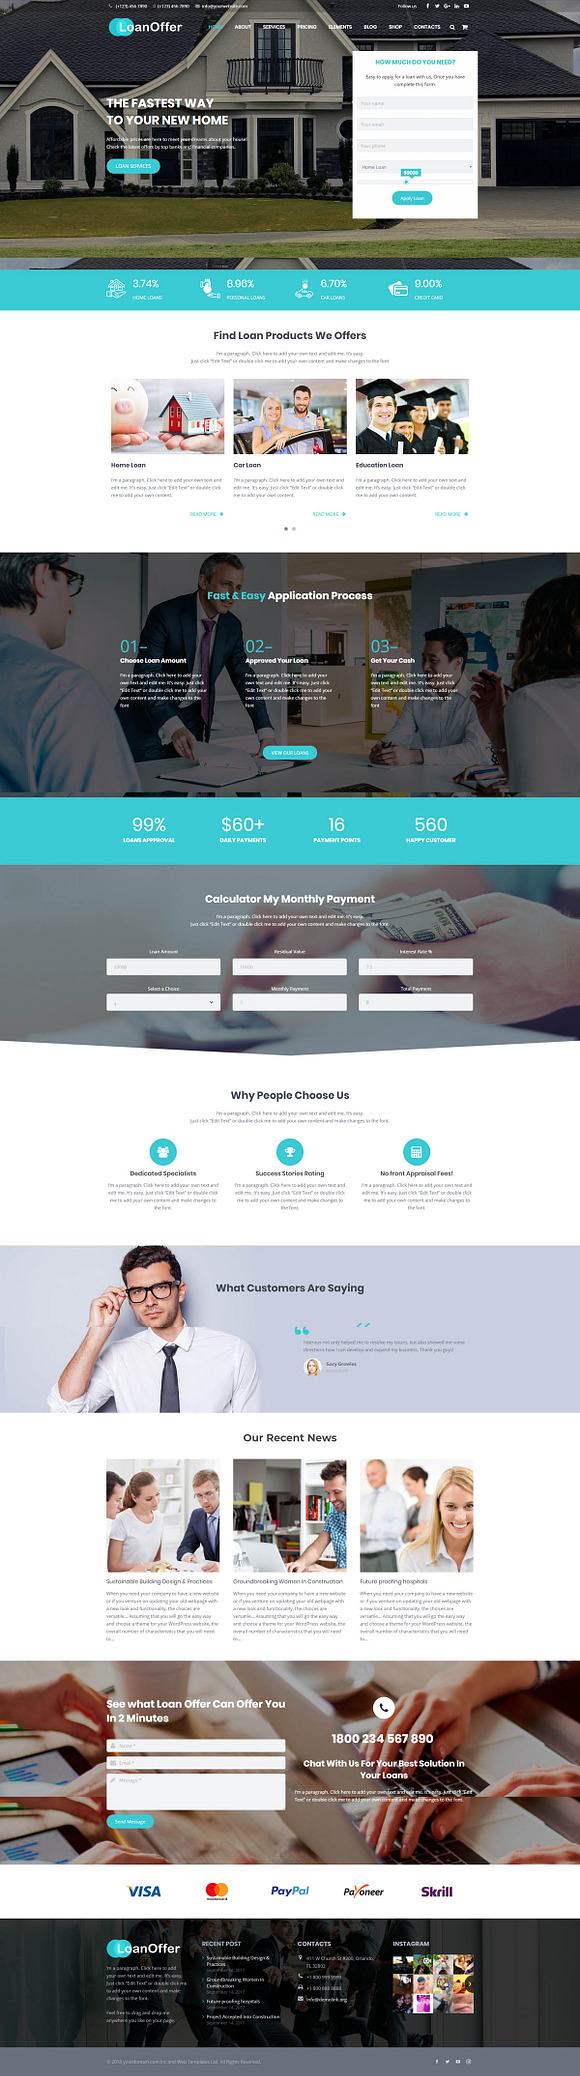 Business Loan & Banking, Home, Money in WordPress Business Themes - product preview 2